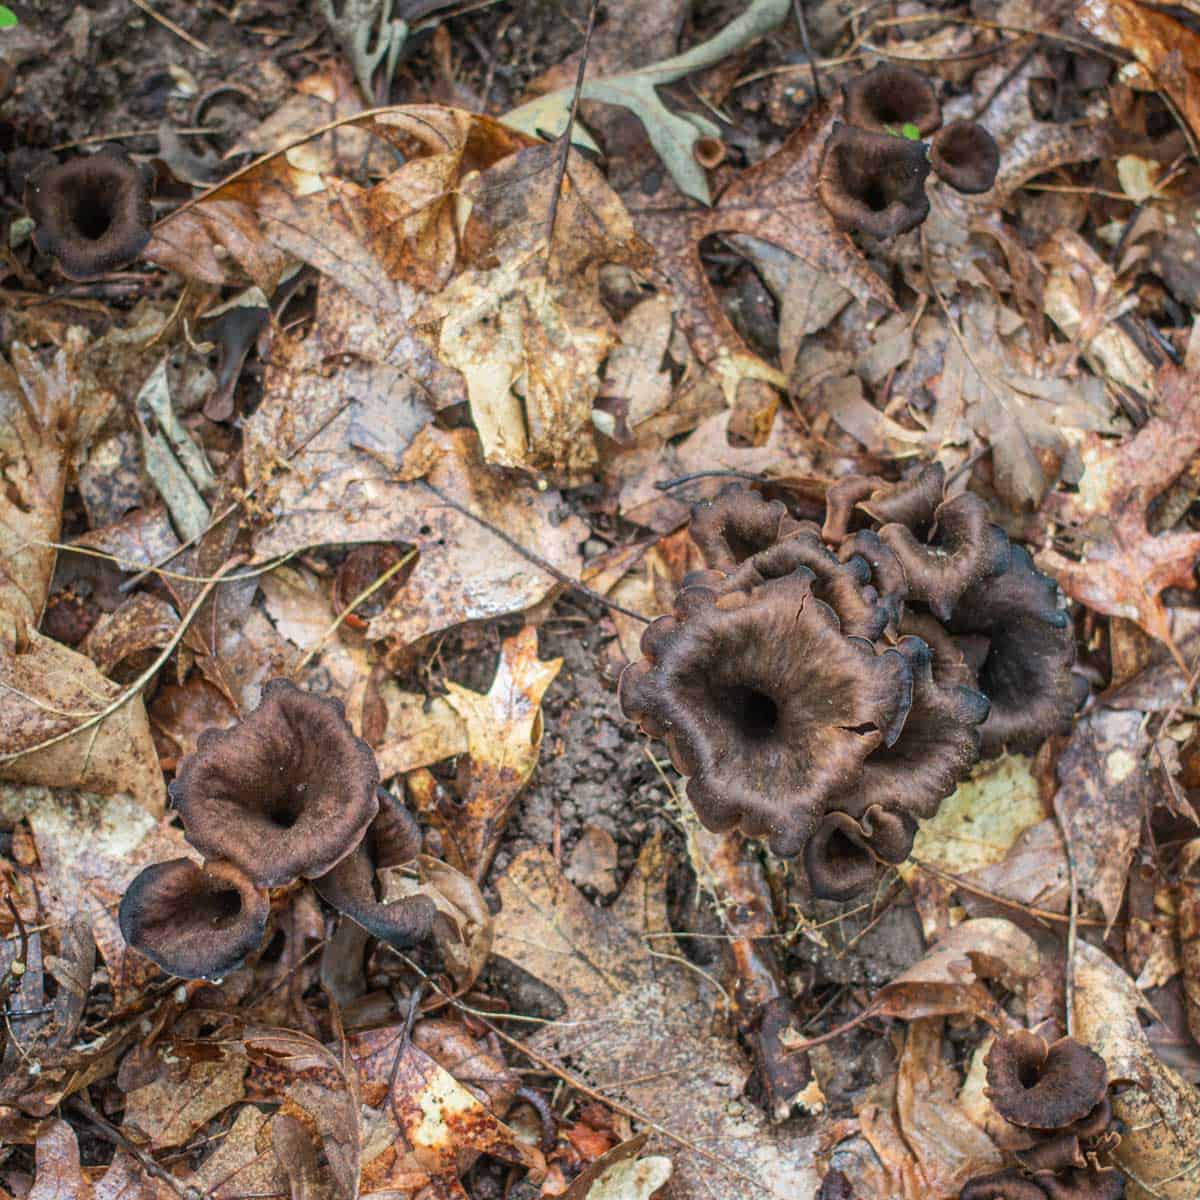 Black trumpet mushrooms or Craterellus fallax in minnesota viewed from above 